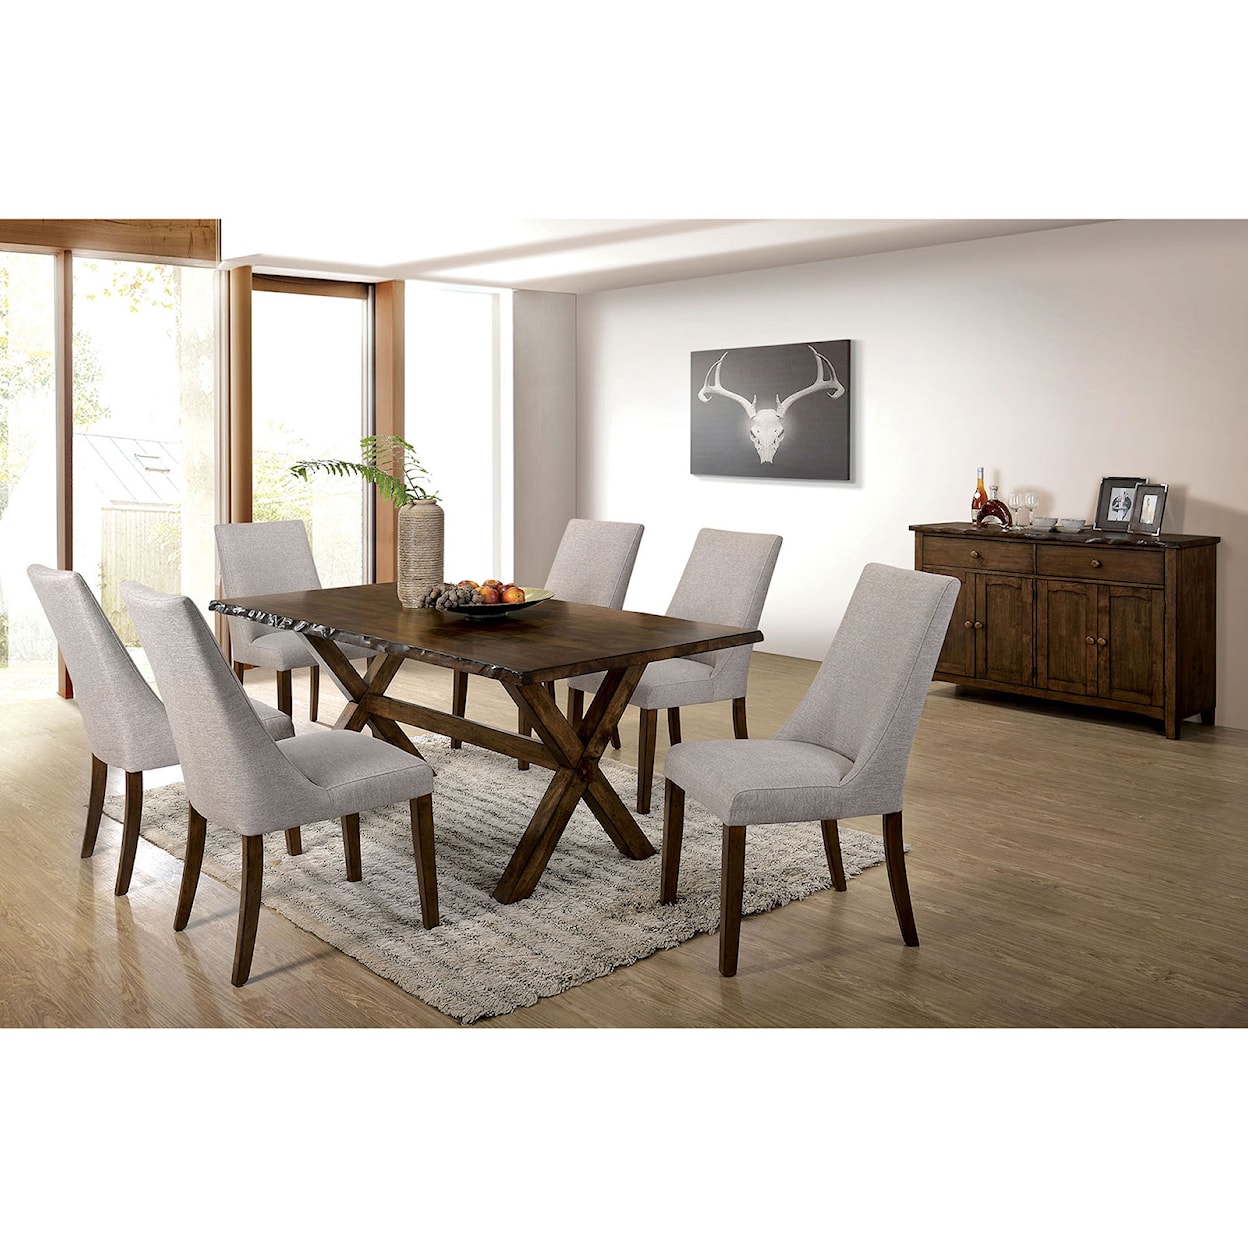 Furniture of America Woodworth 7-Piece Dining Set